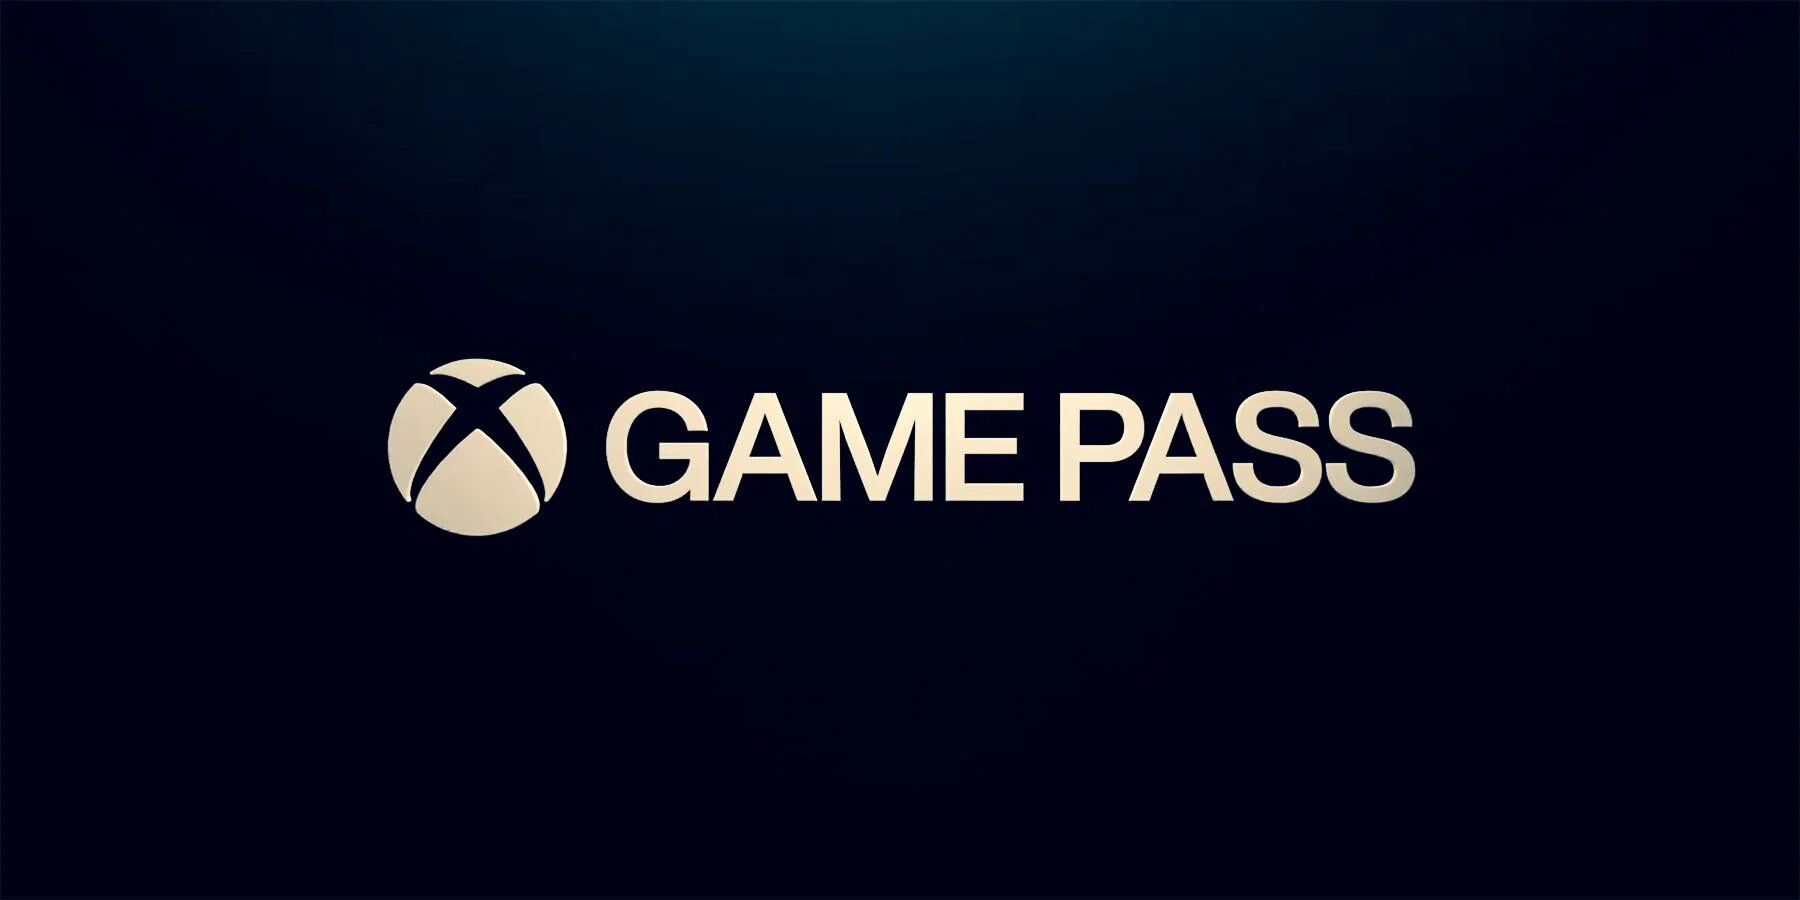 Xbox Game Pass Adds 4 Games Today